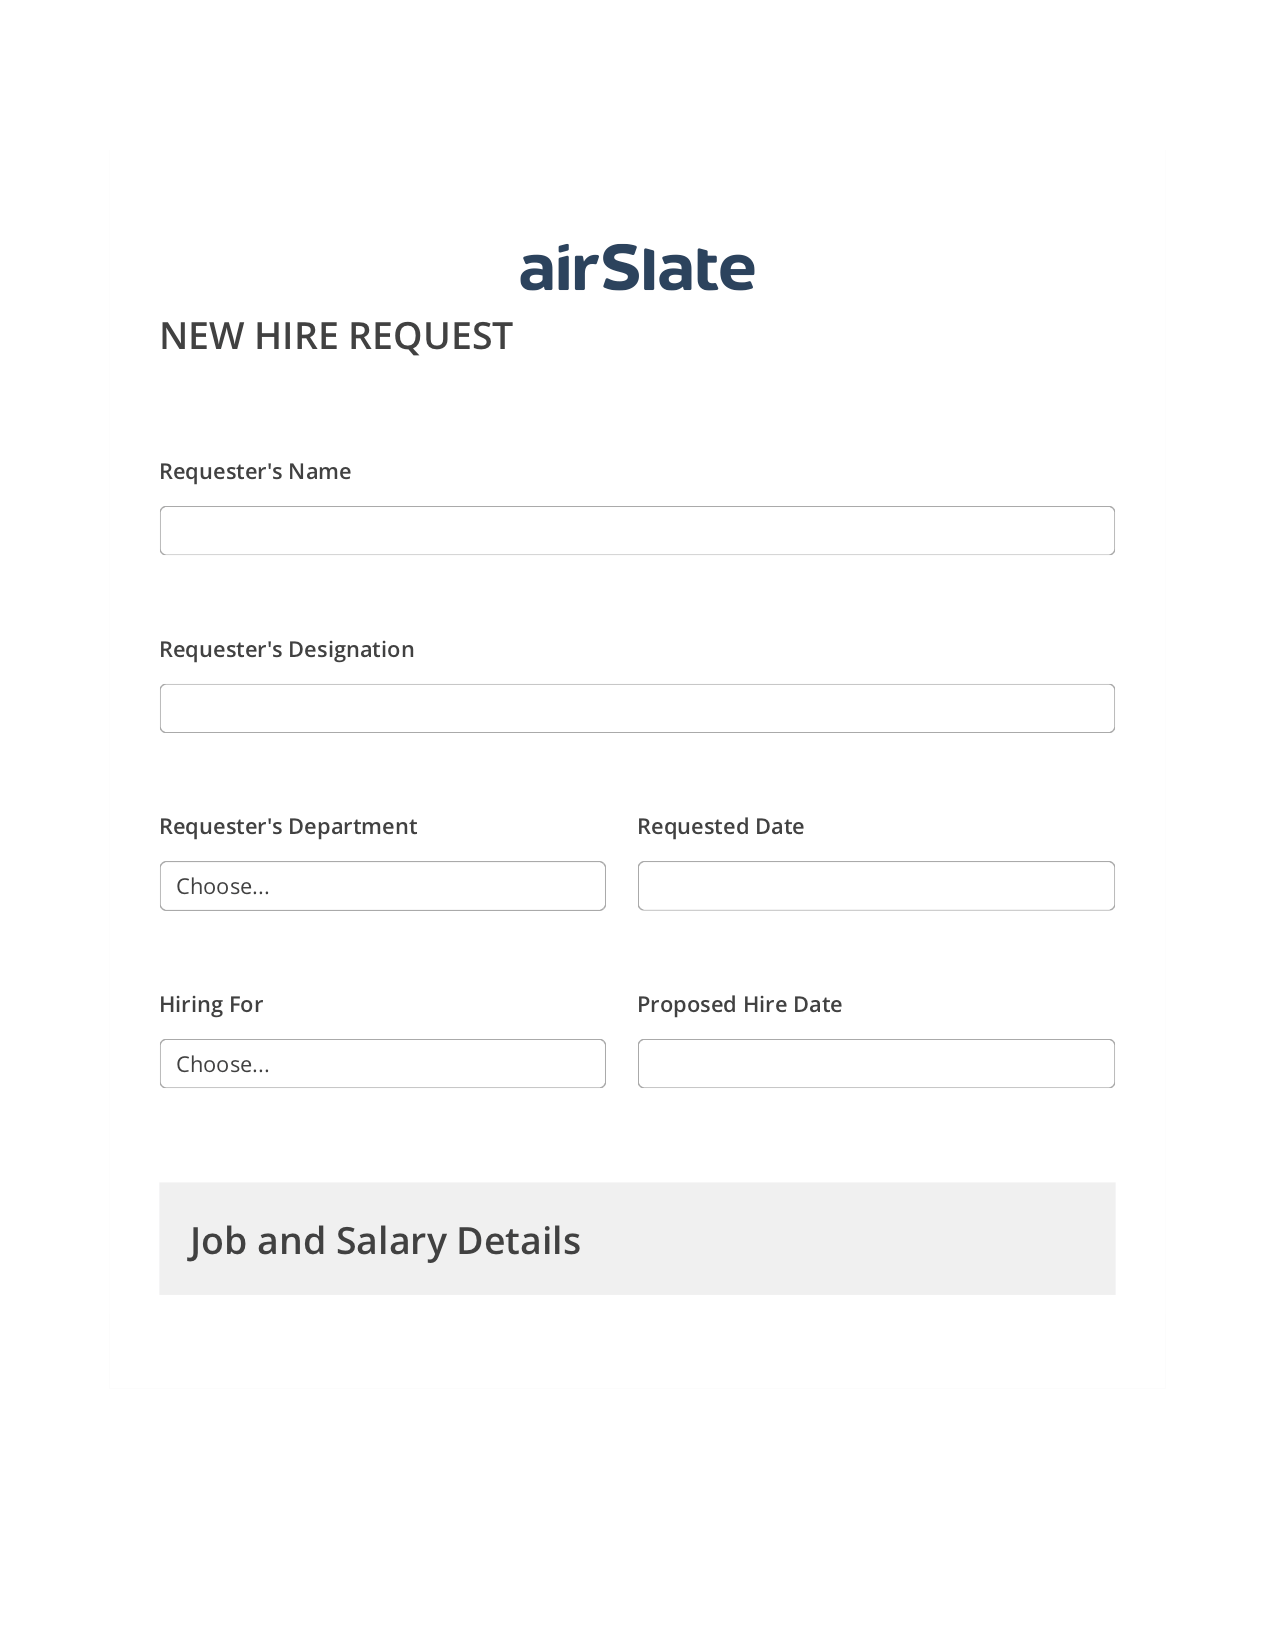 Multirole Hiring Request Workflow Pre-fill Dropdowns from Airtable, Create slate addon, Export to Salesforce Record Bot